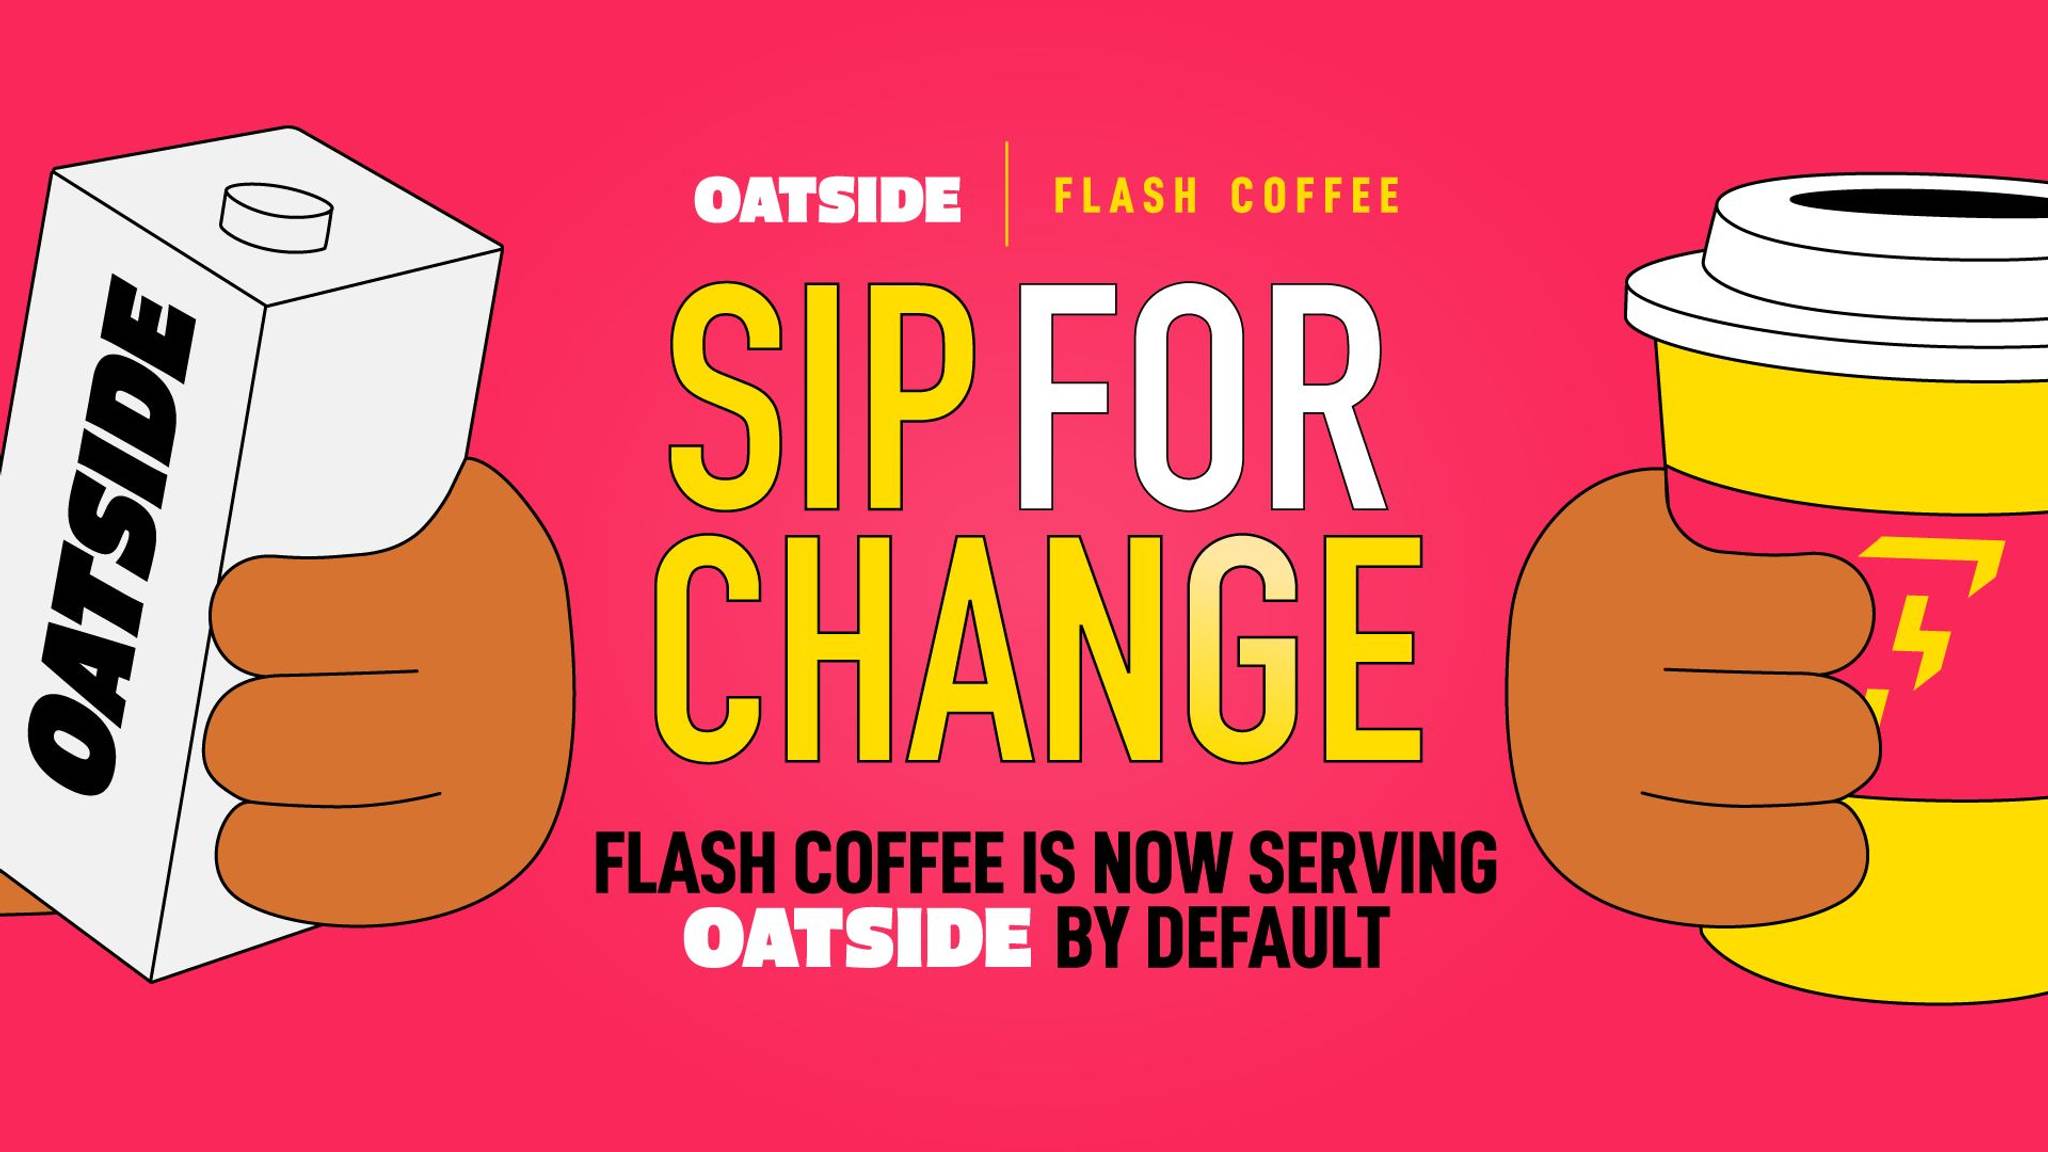 Singapore's Flash Coffee offers oat milk as the default